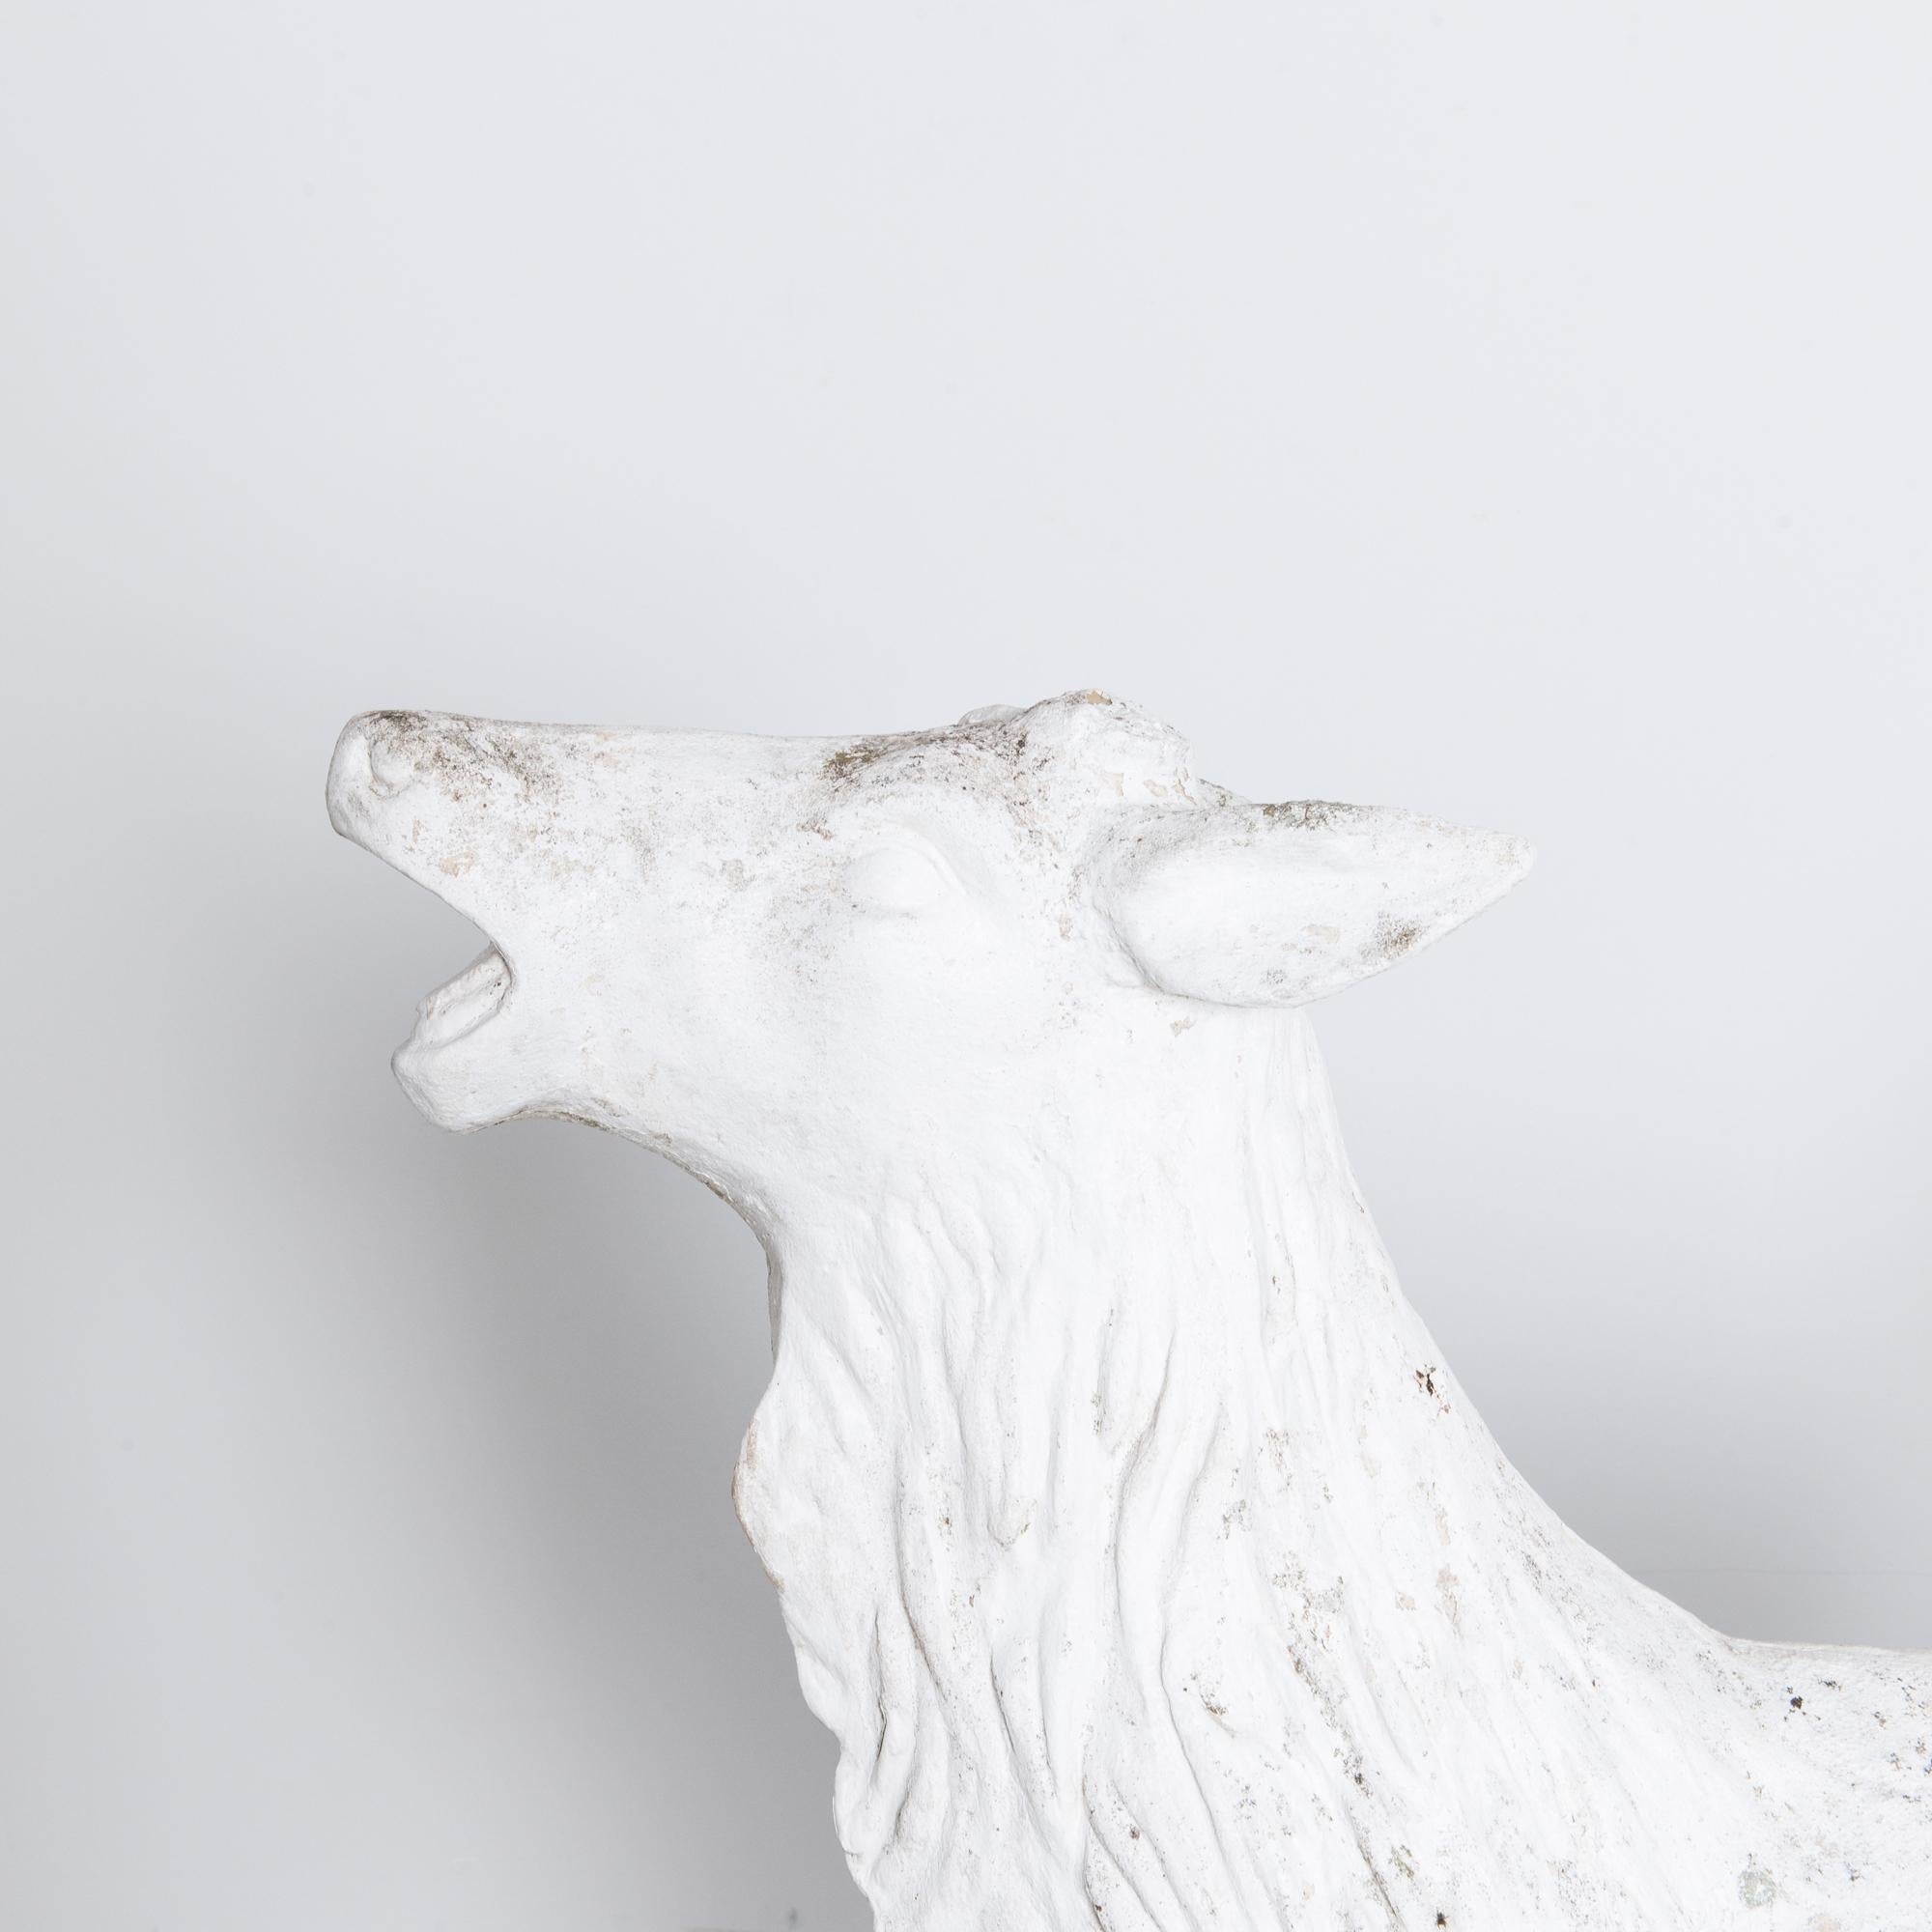 Introducing a striking piece from the 1970s, the Belgian Concrete Deer stands resolute, embodying a powerful and evocative expression. This majestic creature, captured in a moment of dynamic intensity, emanates a visceral presence with its spirited